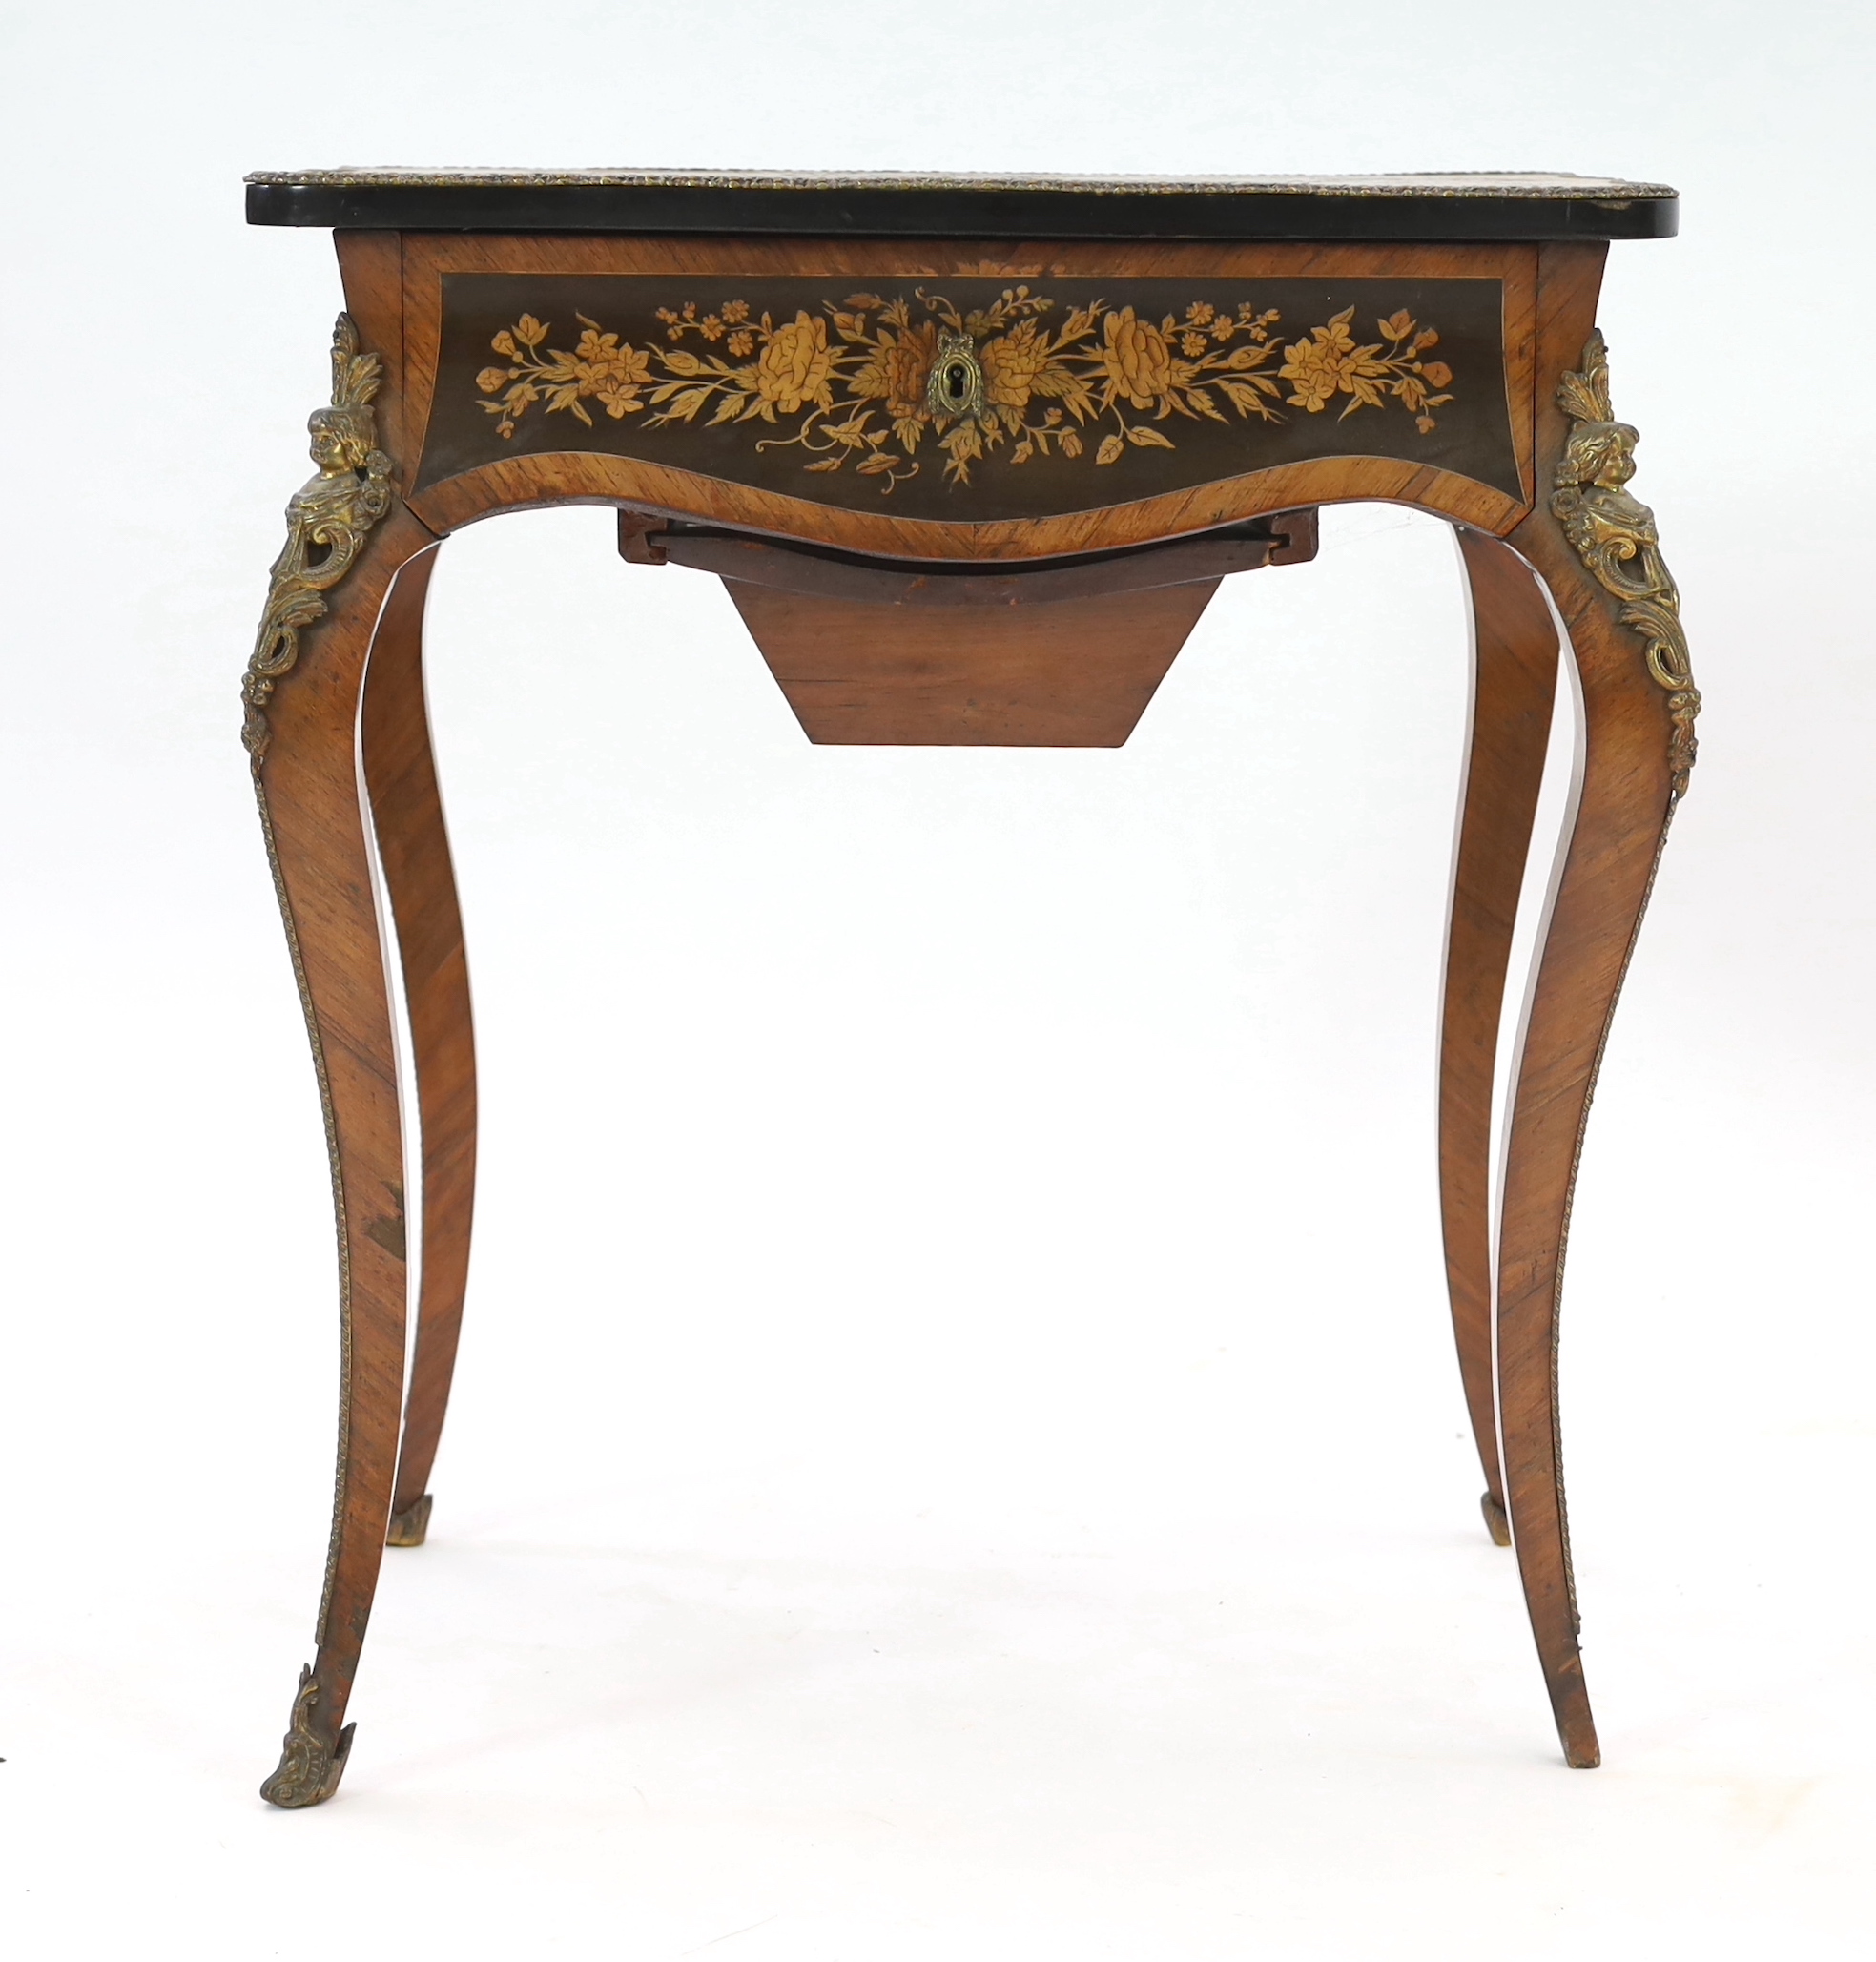 A 19th century French rosewood and marquetry poudreuse, width 63cm, depth 43cm, height 73cm